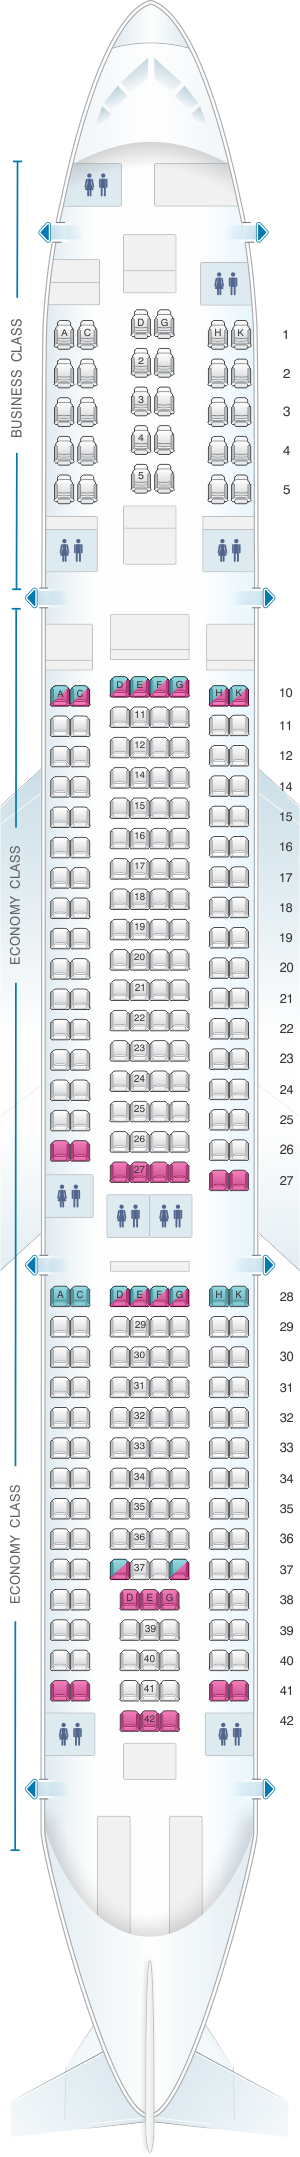 Seat map for Asiana Airlines Airbus A330 300 275PAX